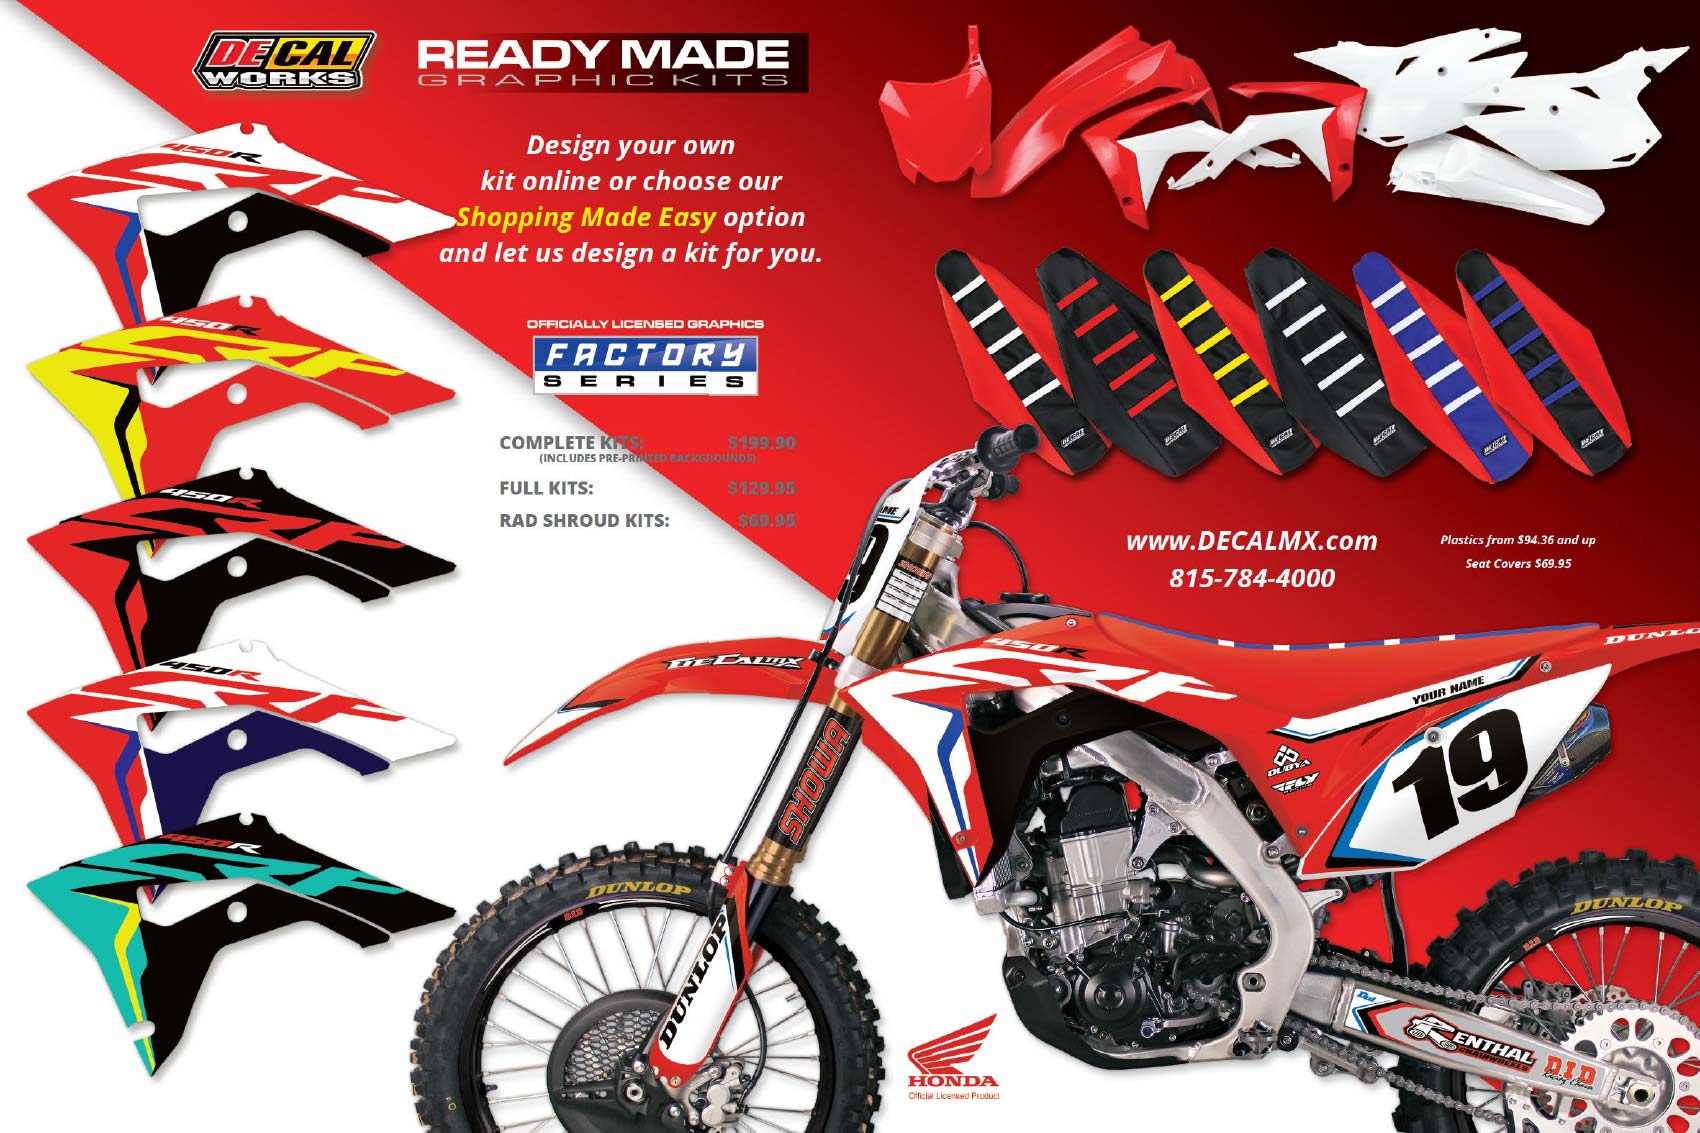 Racer X May 2019 - Decal Works Advertisement